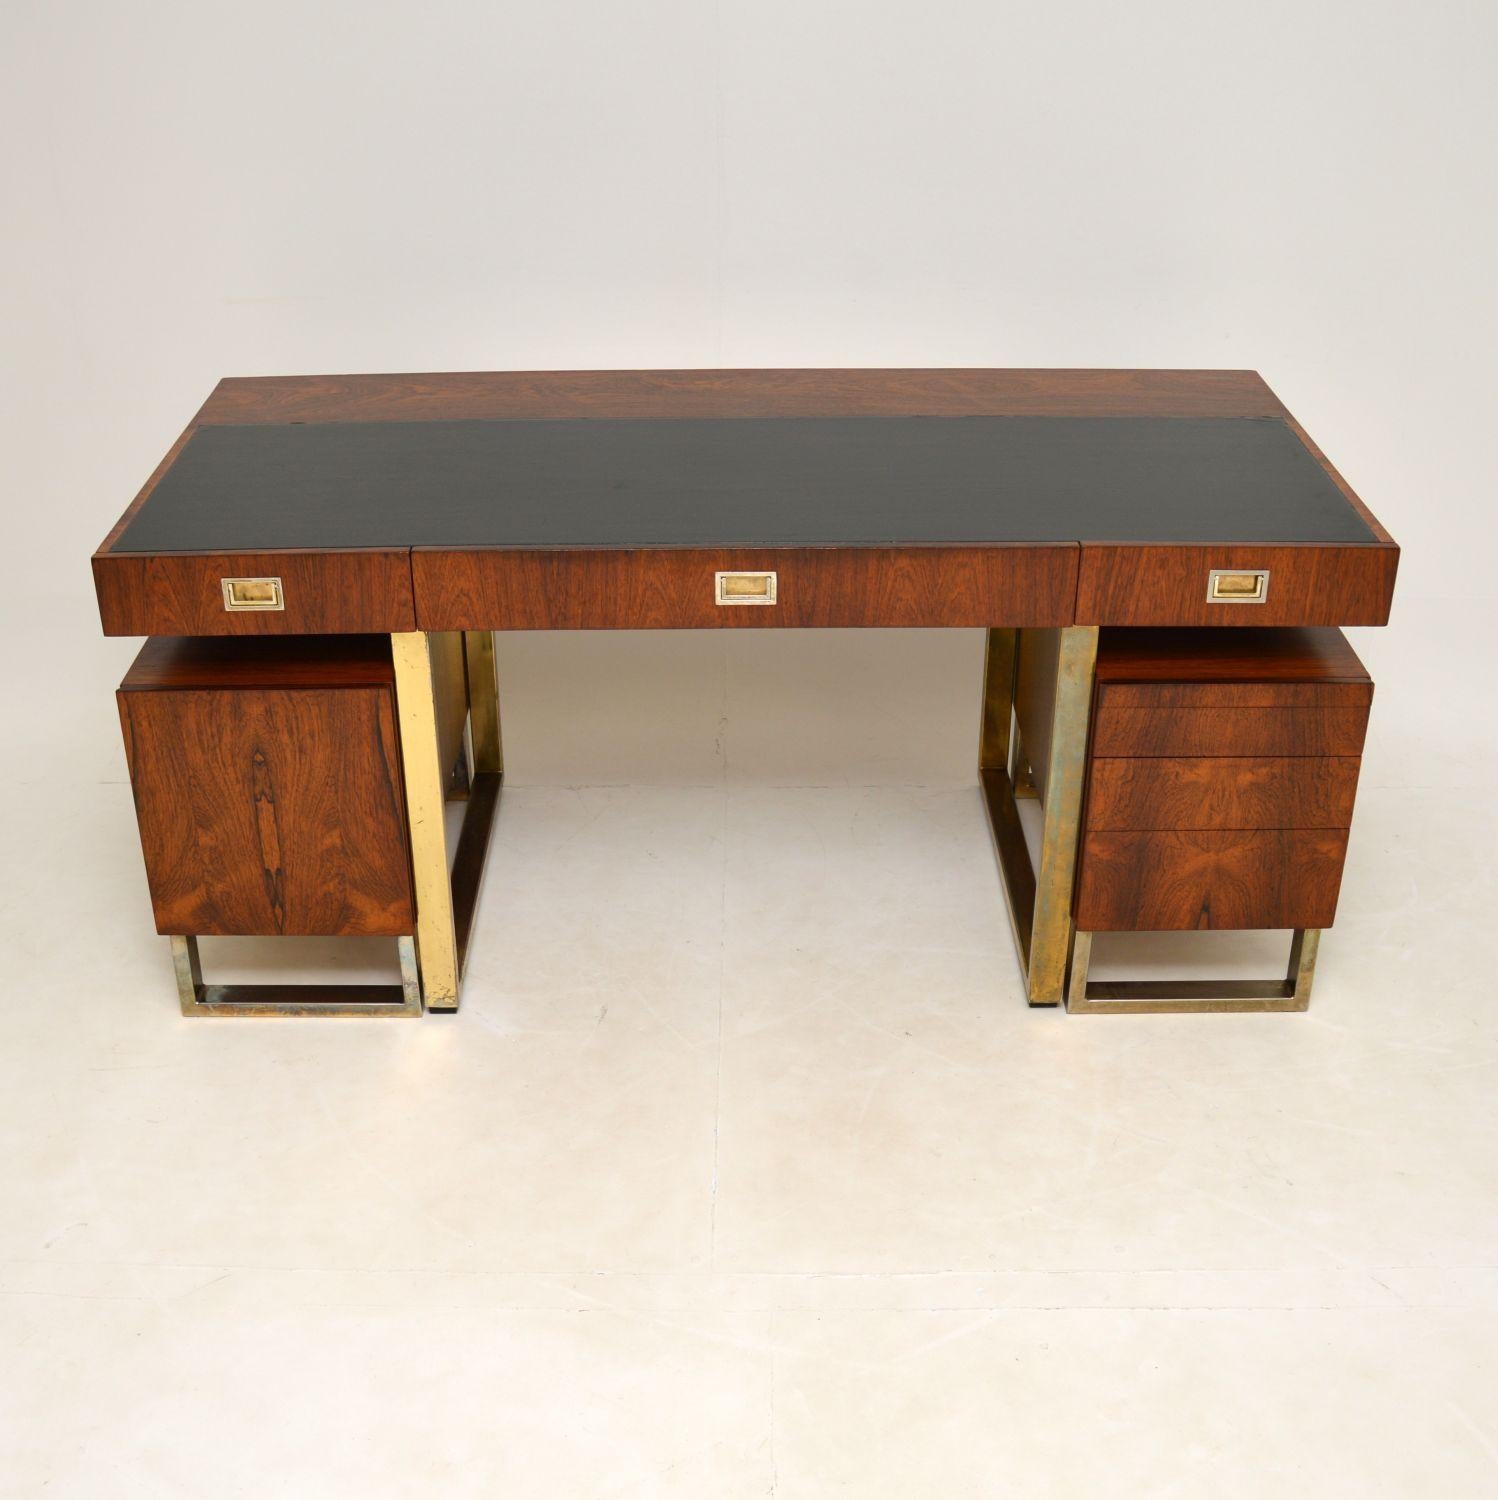 A magnificent and very rare vintage partners desk, beautifully made from wood, leather and brass plated steel. This was made in England, it dates from the 1960’s.

The quality is absolutely outstanding and this is a most impressive piece. The